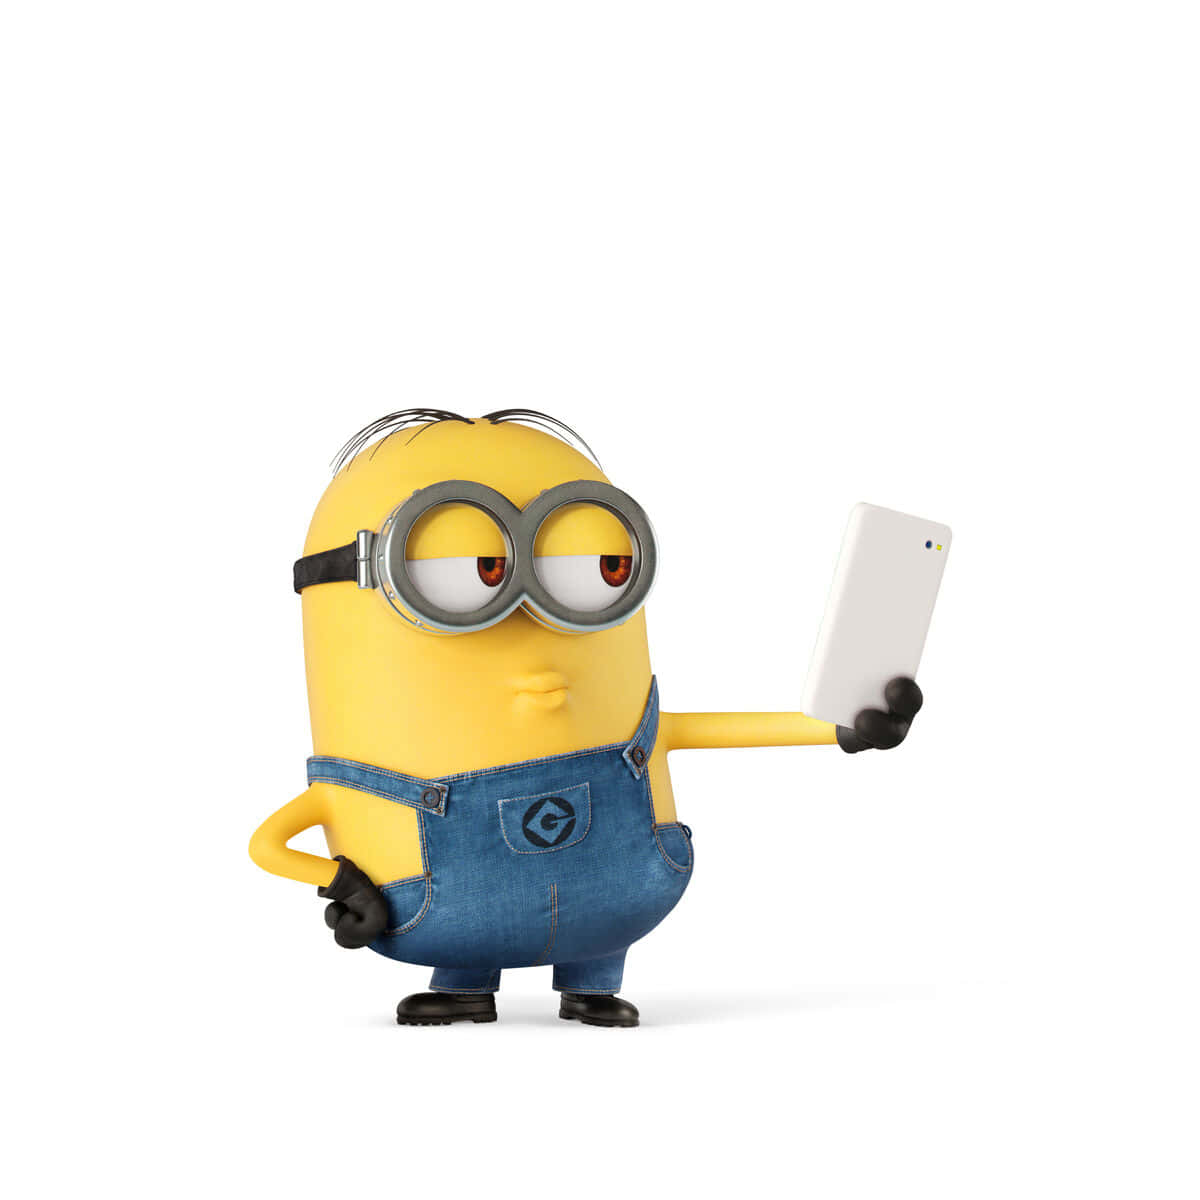 Minion Holding A Cell Phone